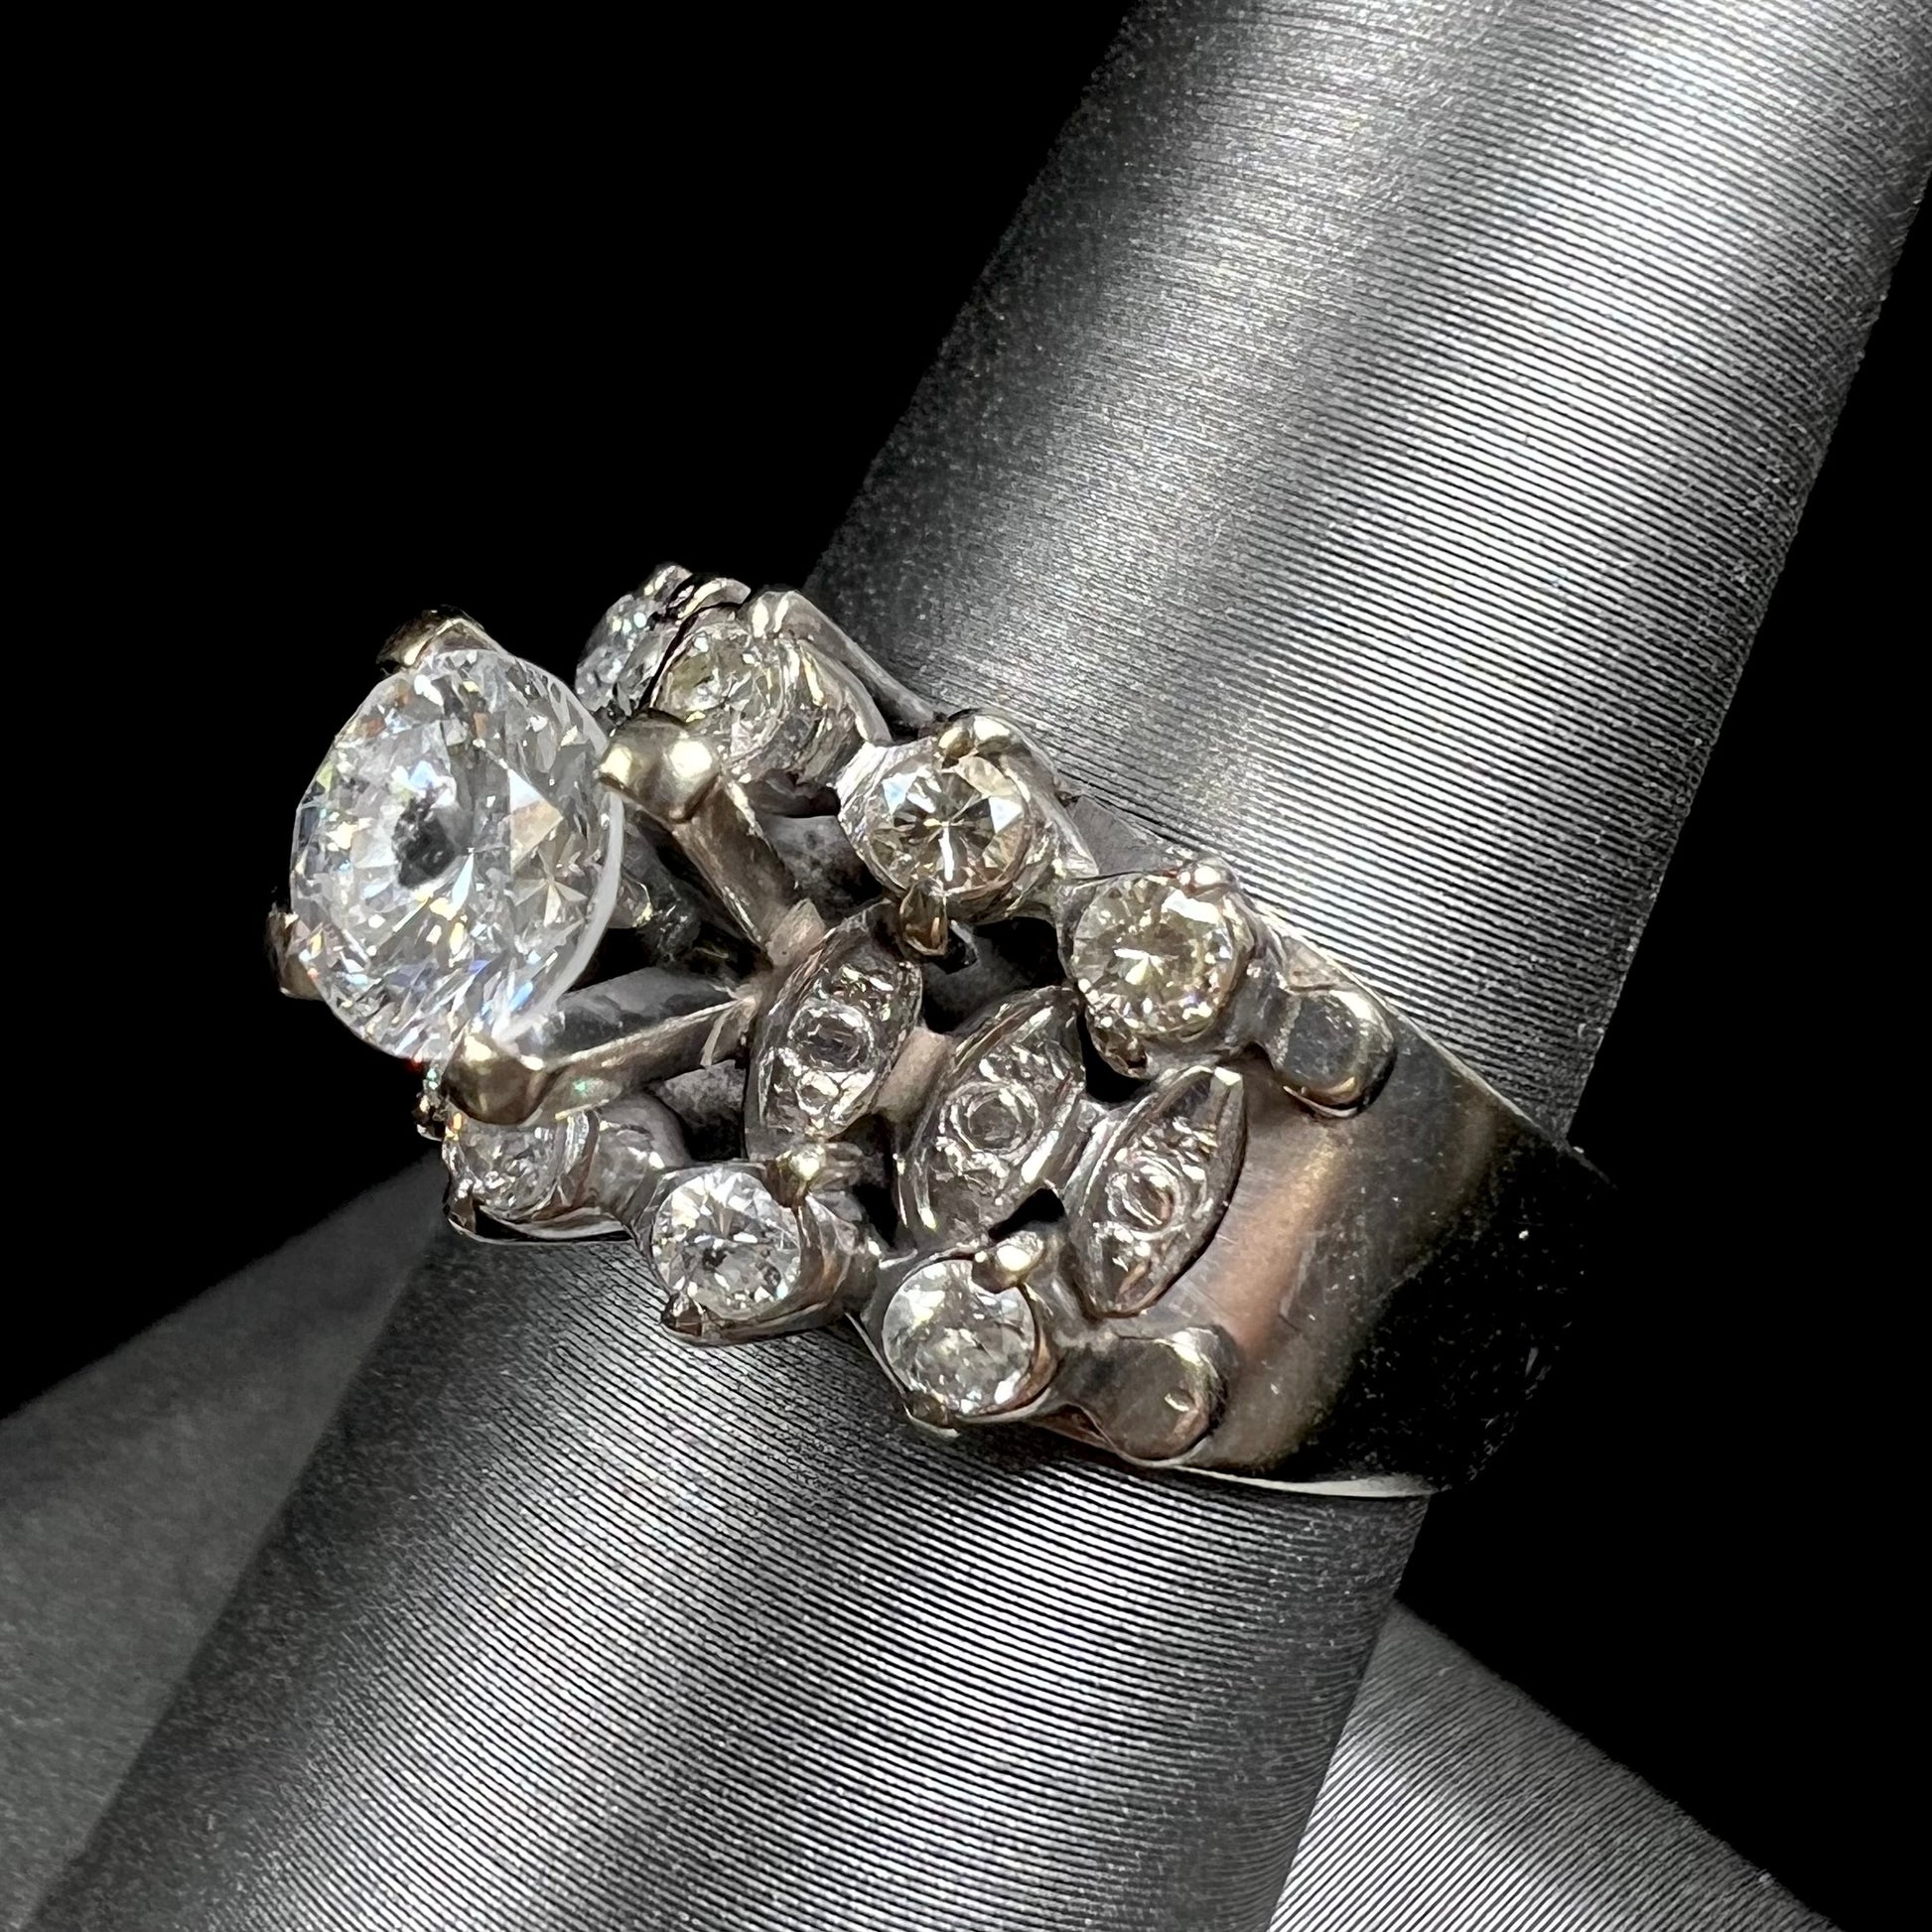 A vintage, 1940's style white gold diamond wedding ring set with a 0.68ct round diamond.  The diamond has a noticeable black crystal inclusion.